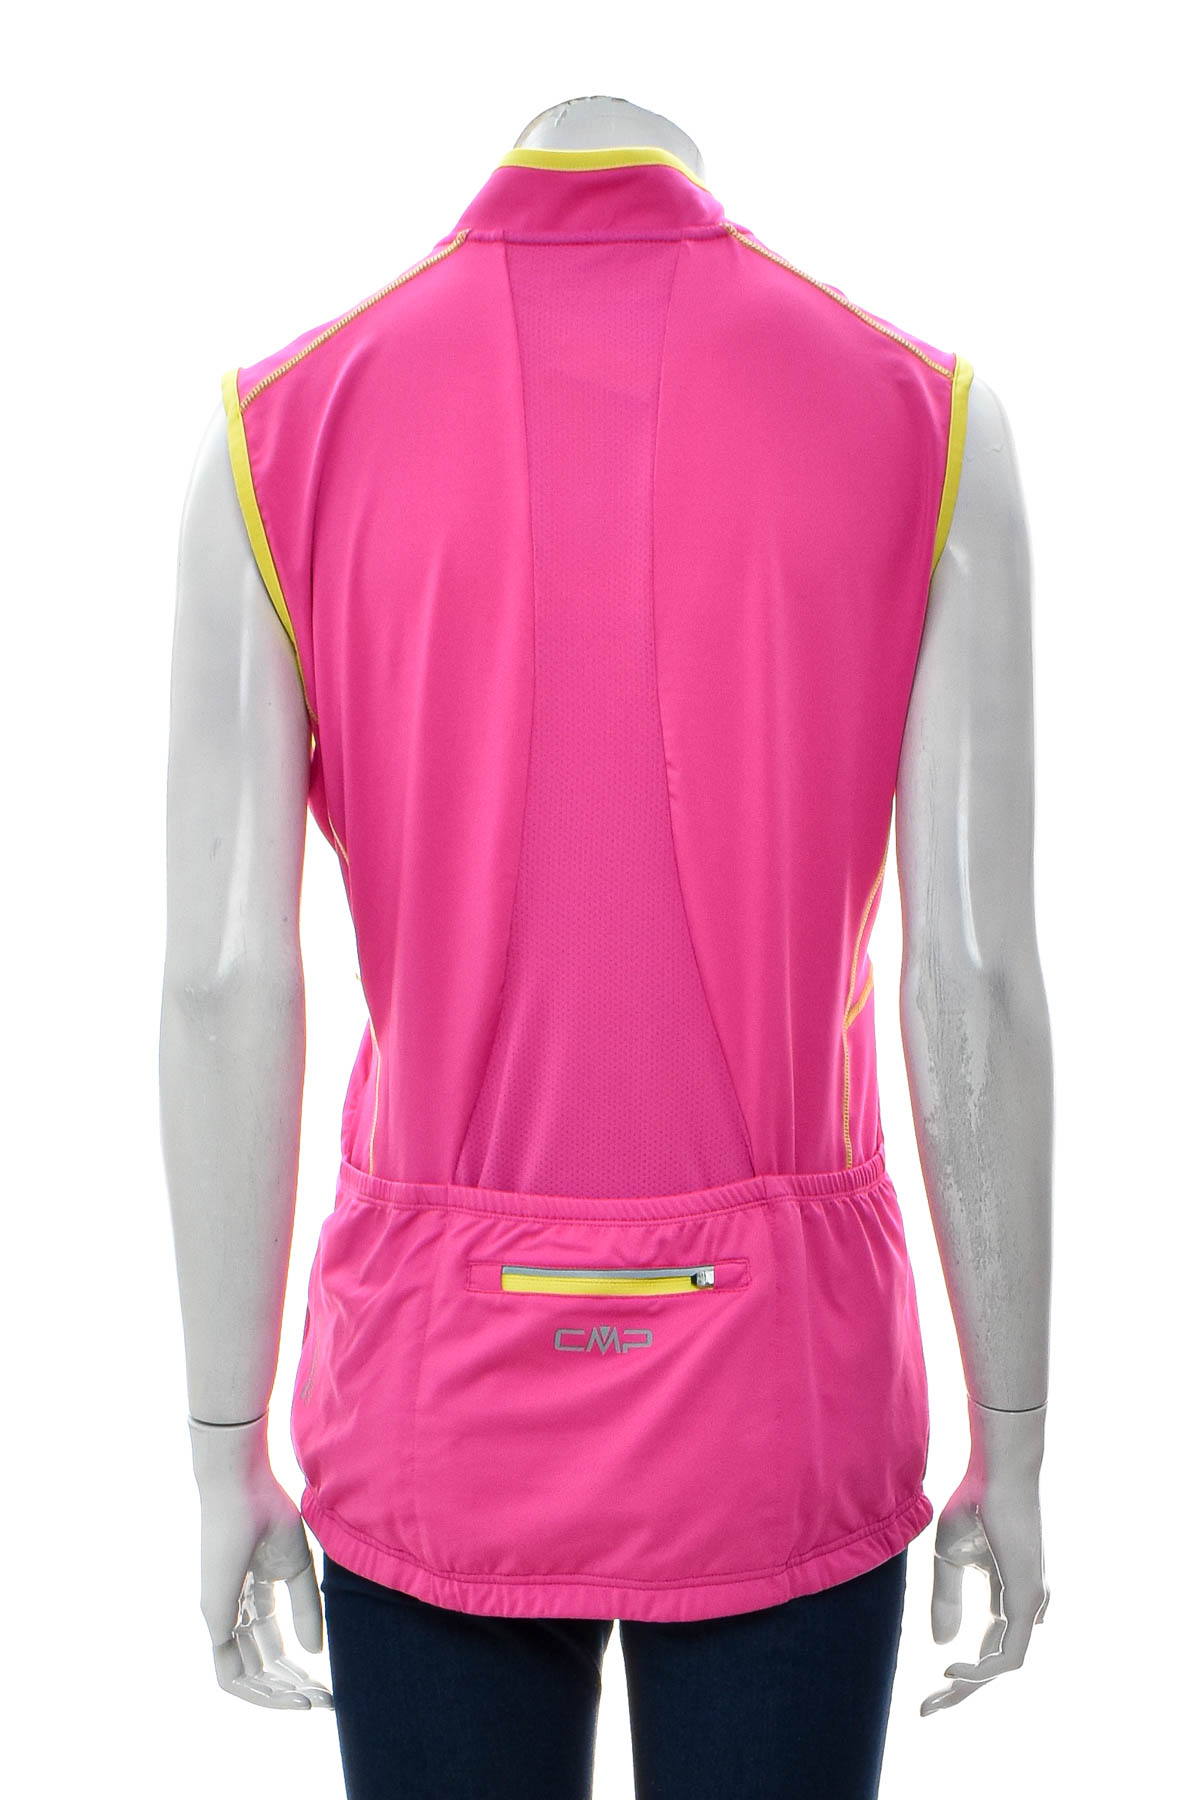 Women's top for cycling - CMP - 1